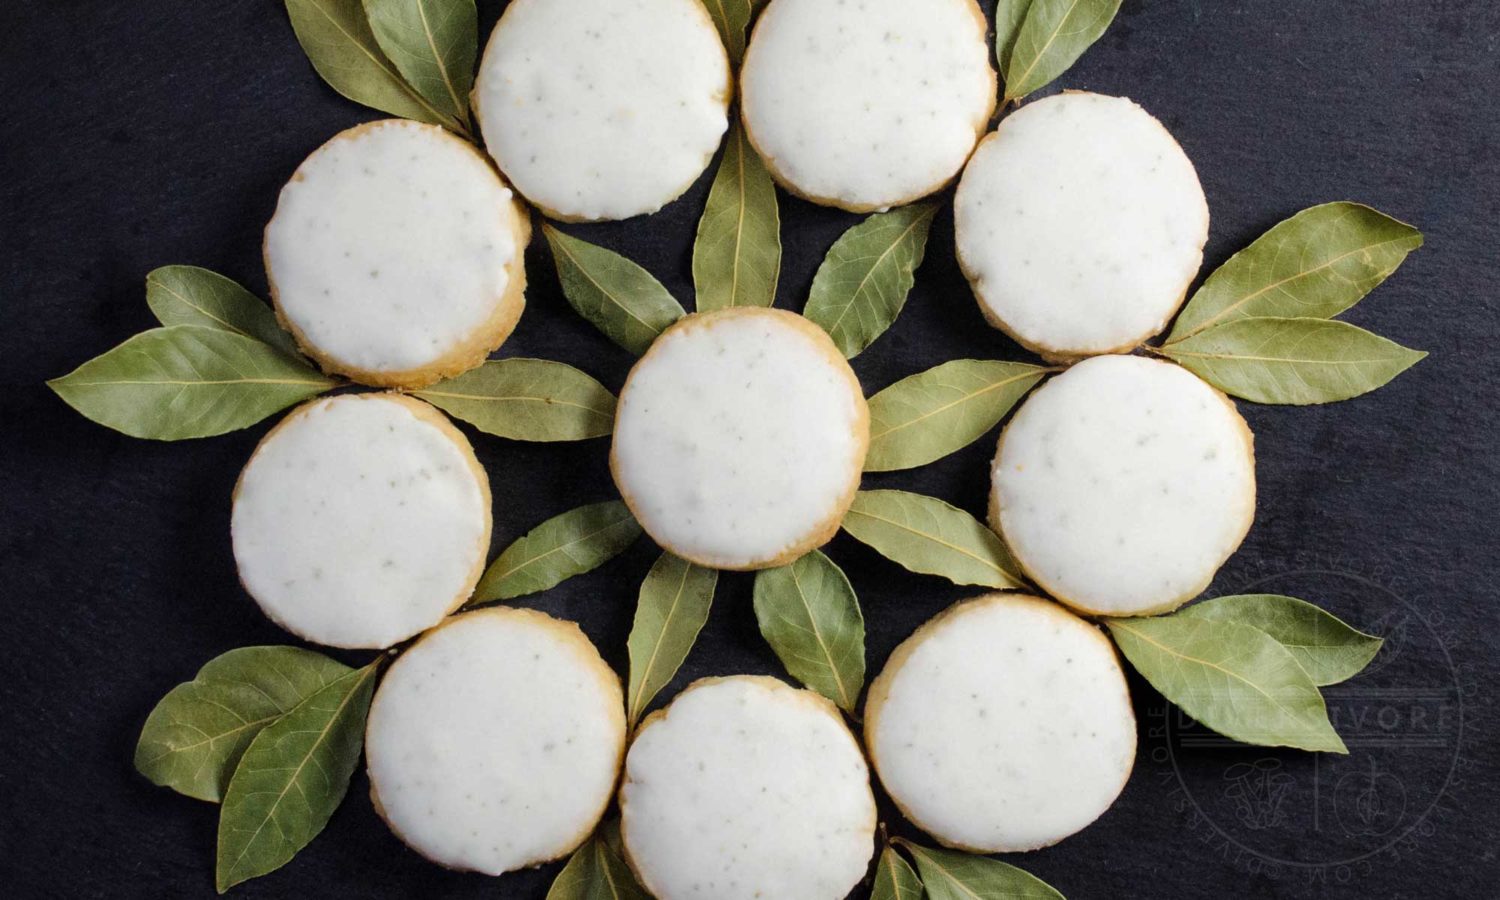 Bayleaf and lemon shortbread arranged in a decorative wreath-like circle, surrounded by bay leaves